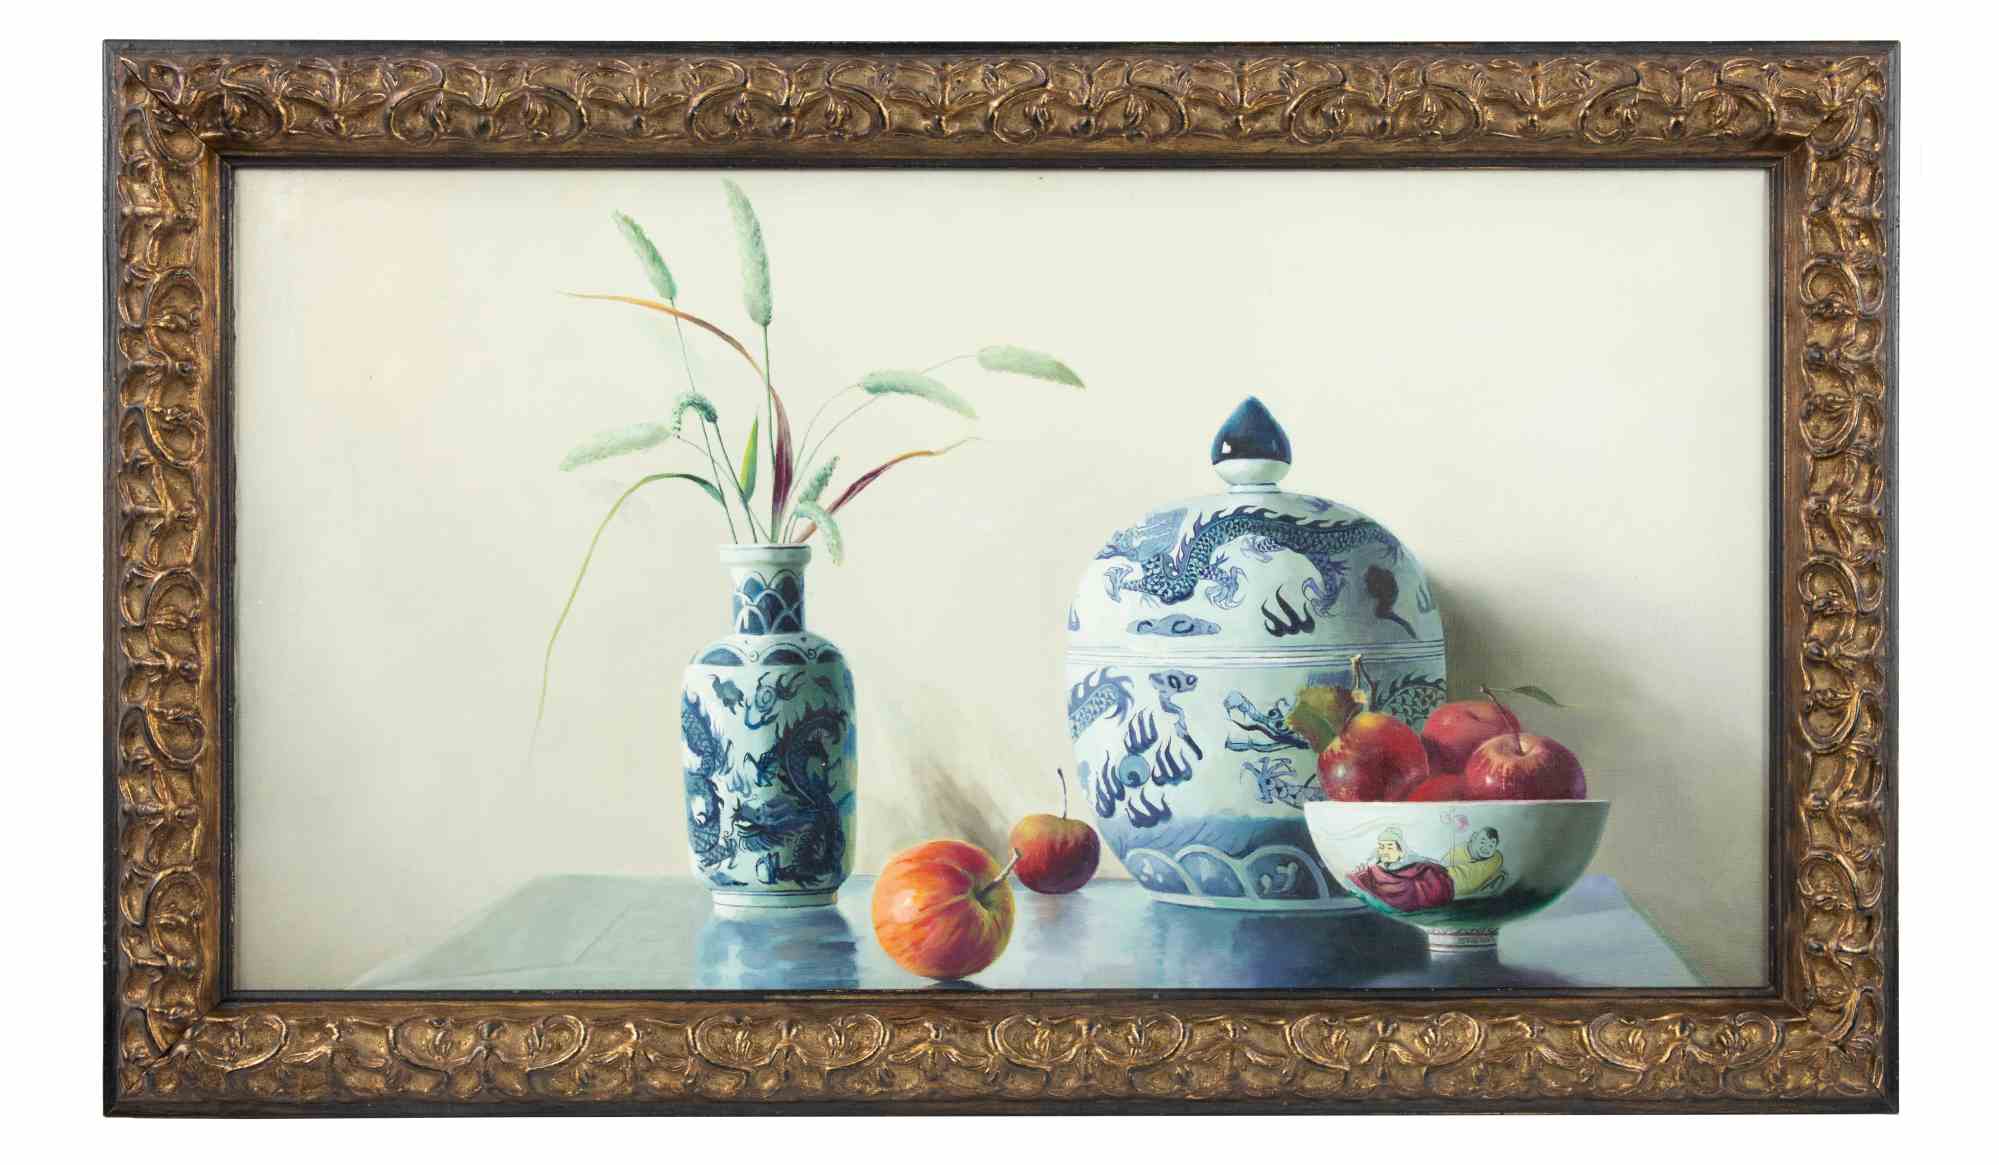 Vases and Fruits